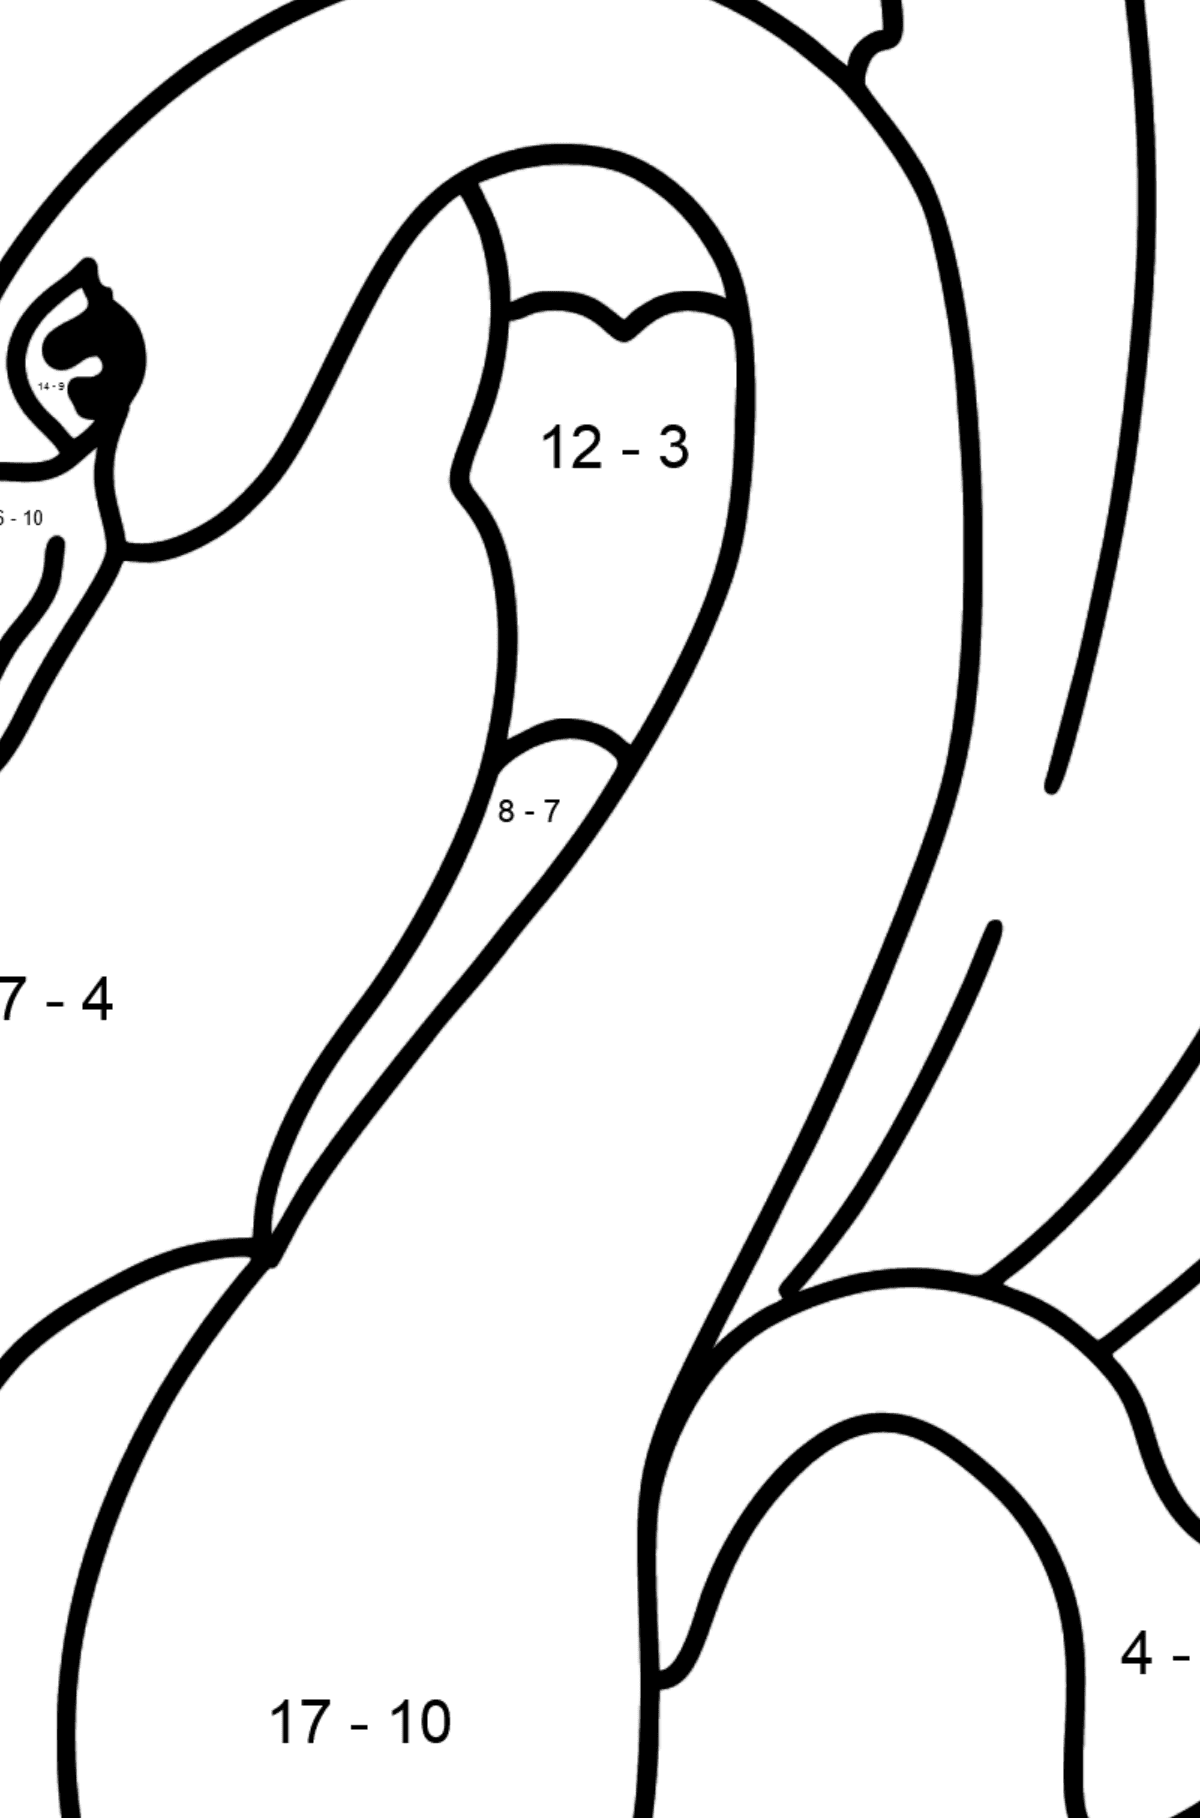 Black Swan coloring page - Math Coloring - Subtraction for Kids